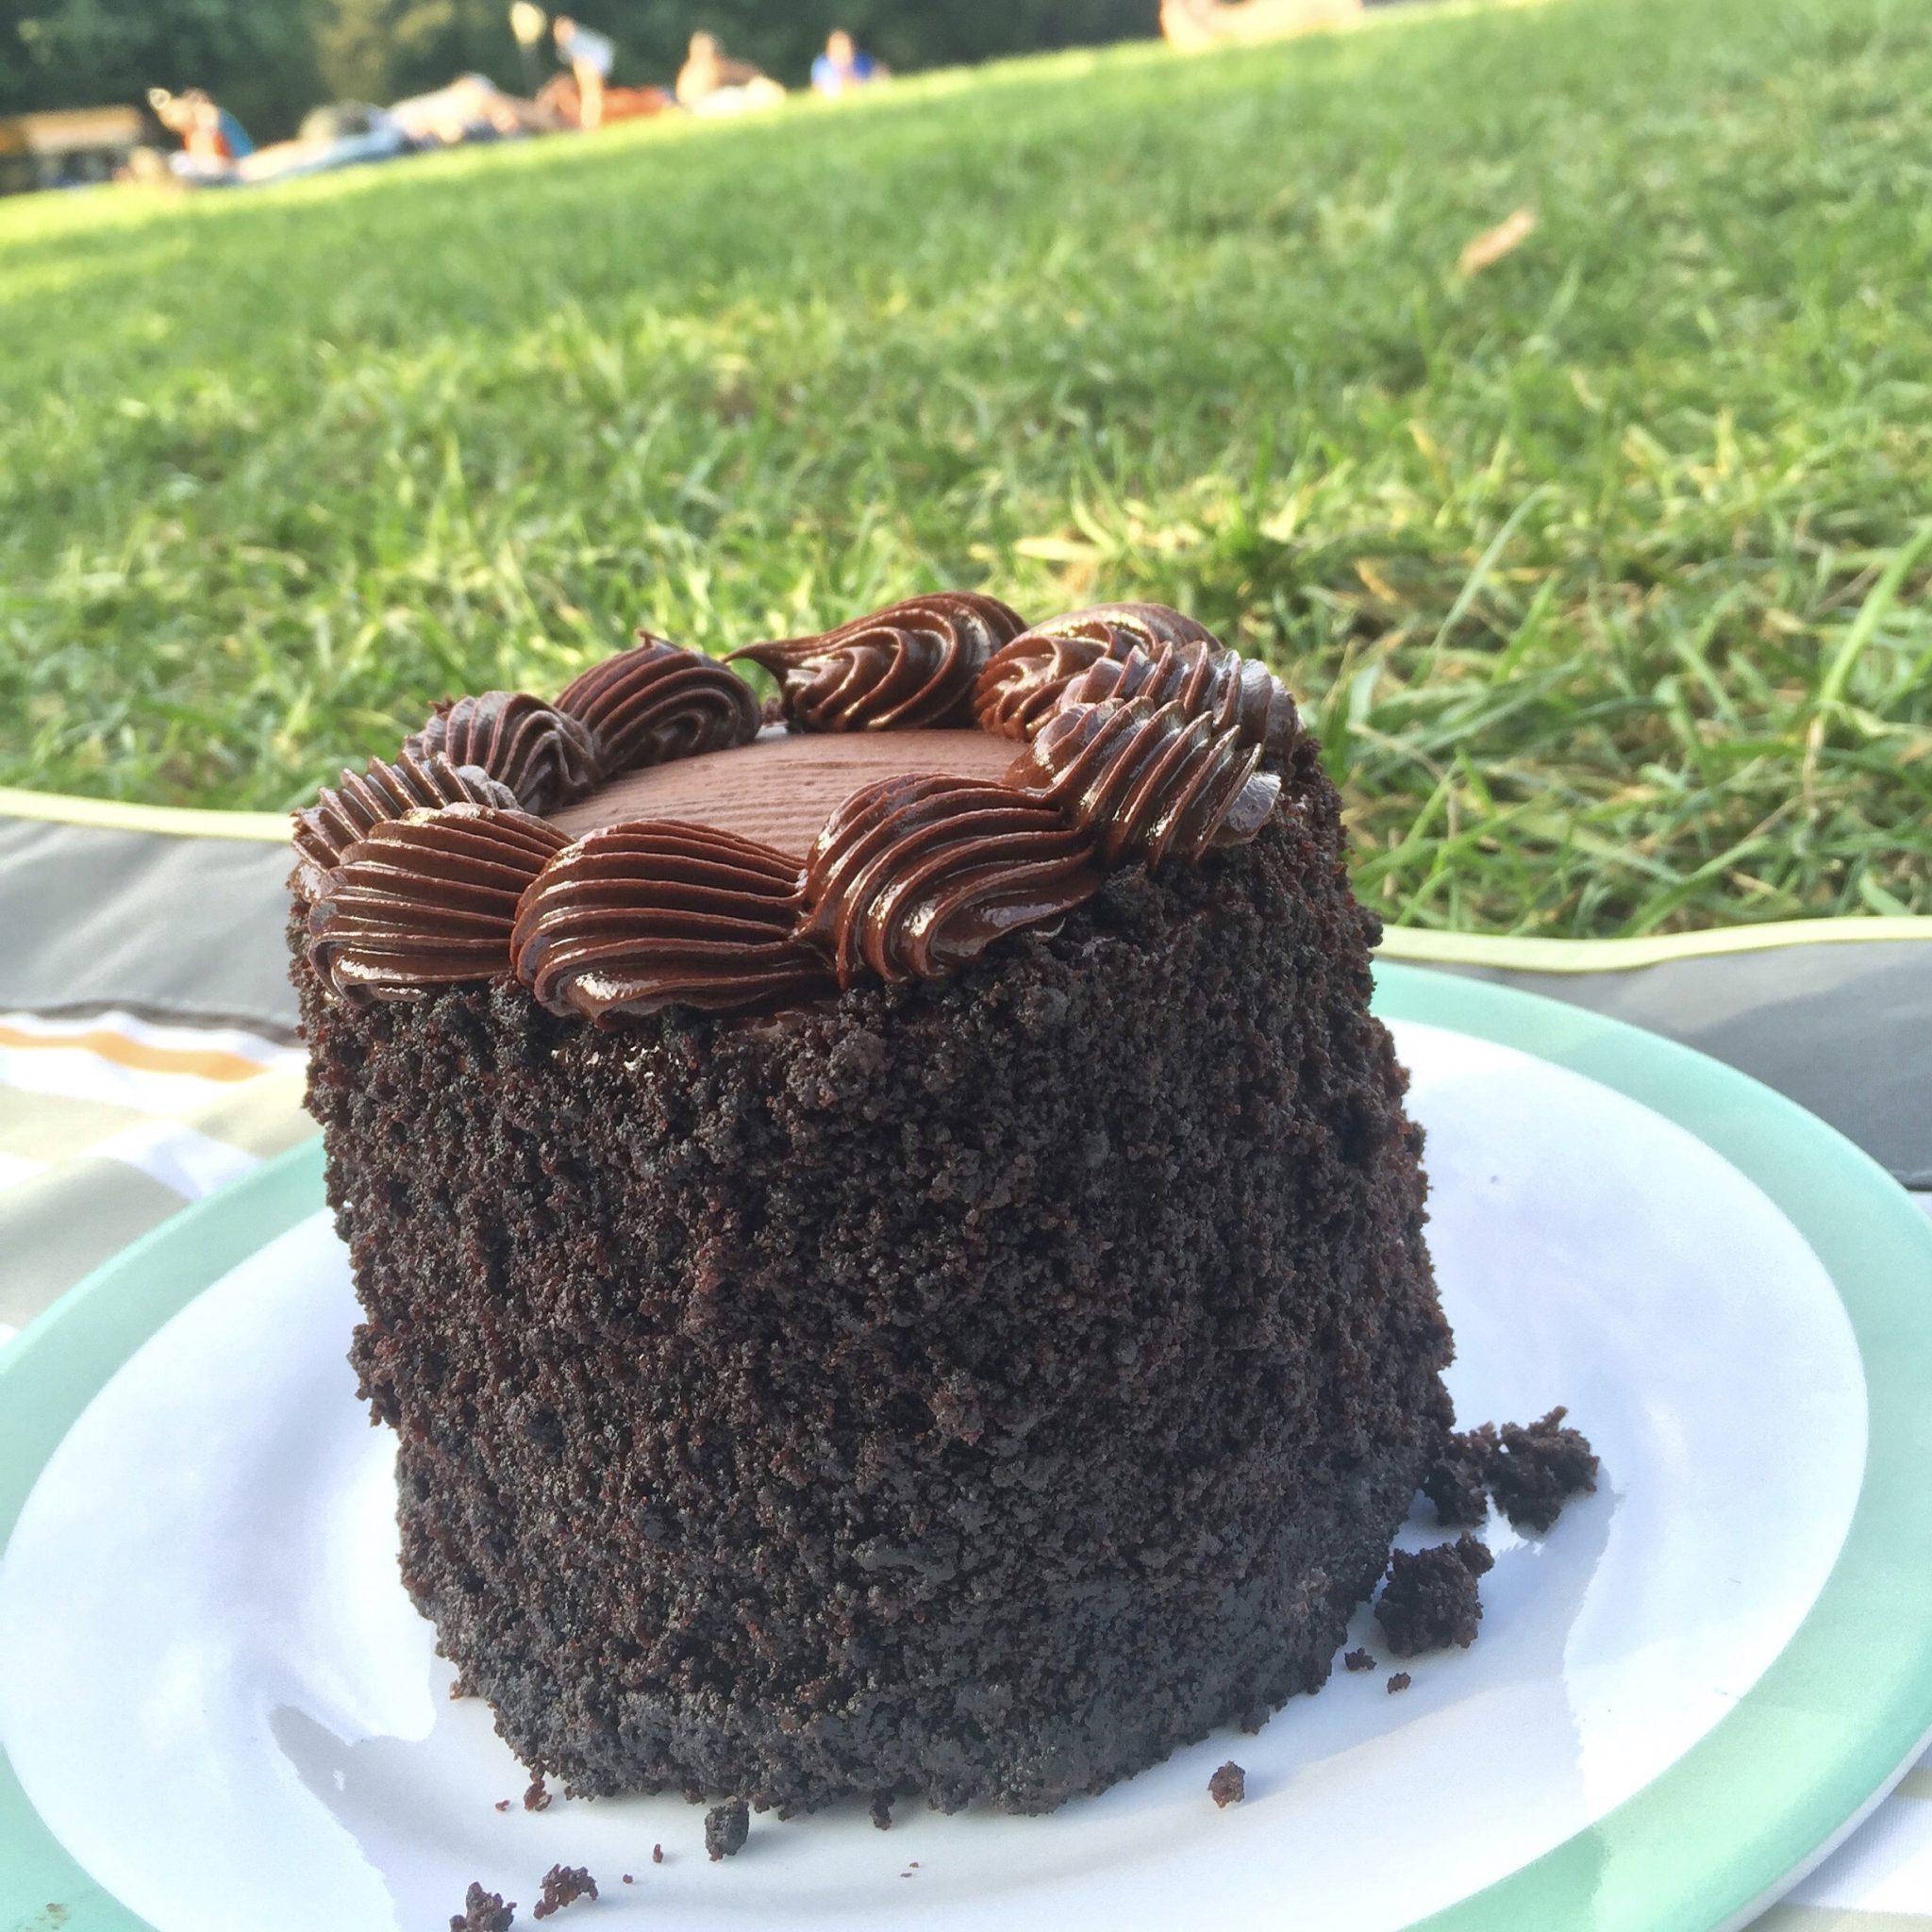 Brooklyn Blackout Cake: the Best NYC Dessert that was Almost Forgotten